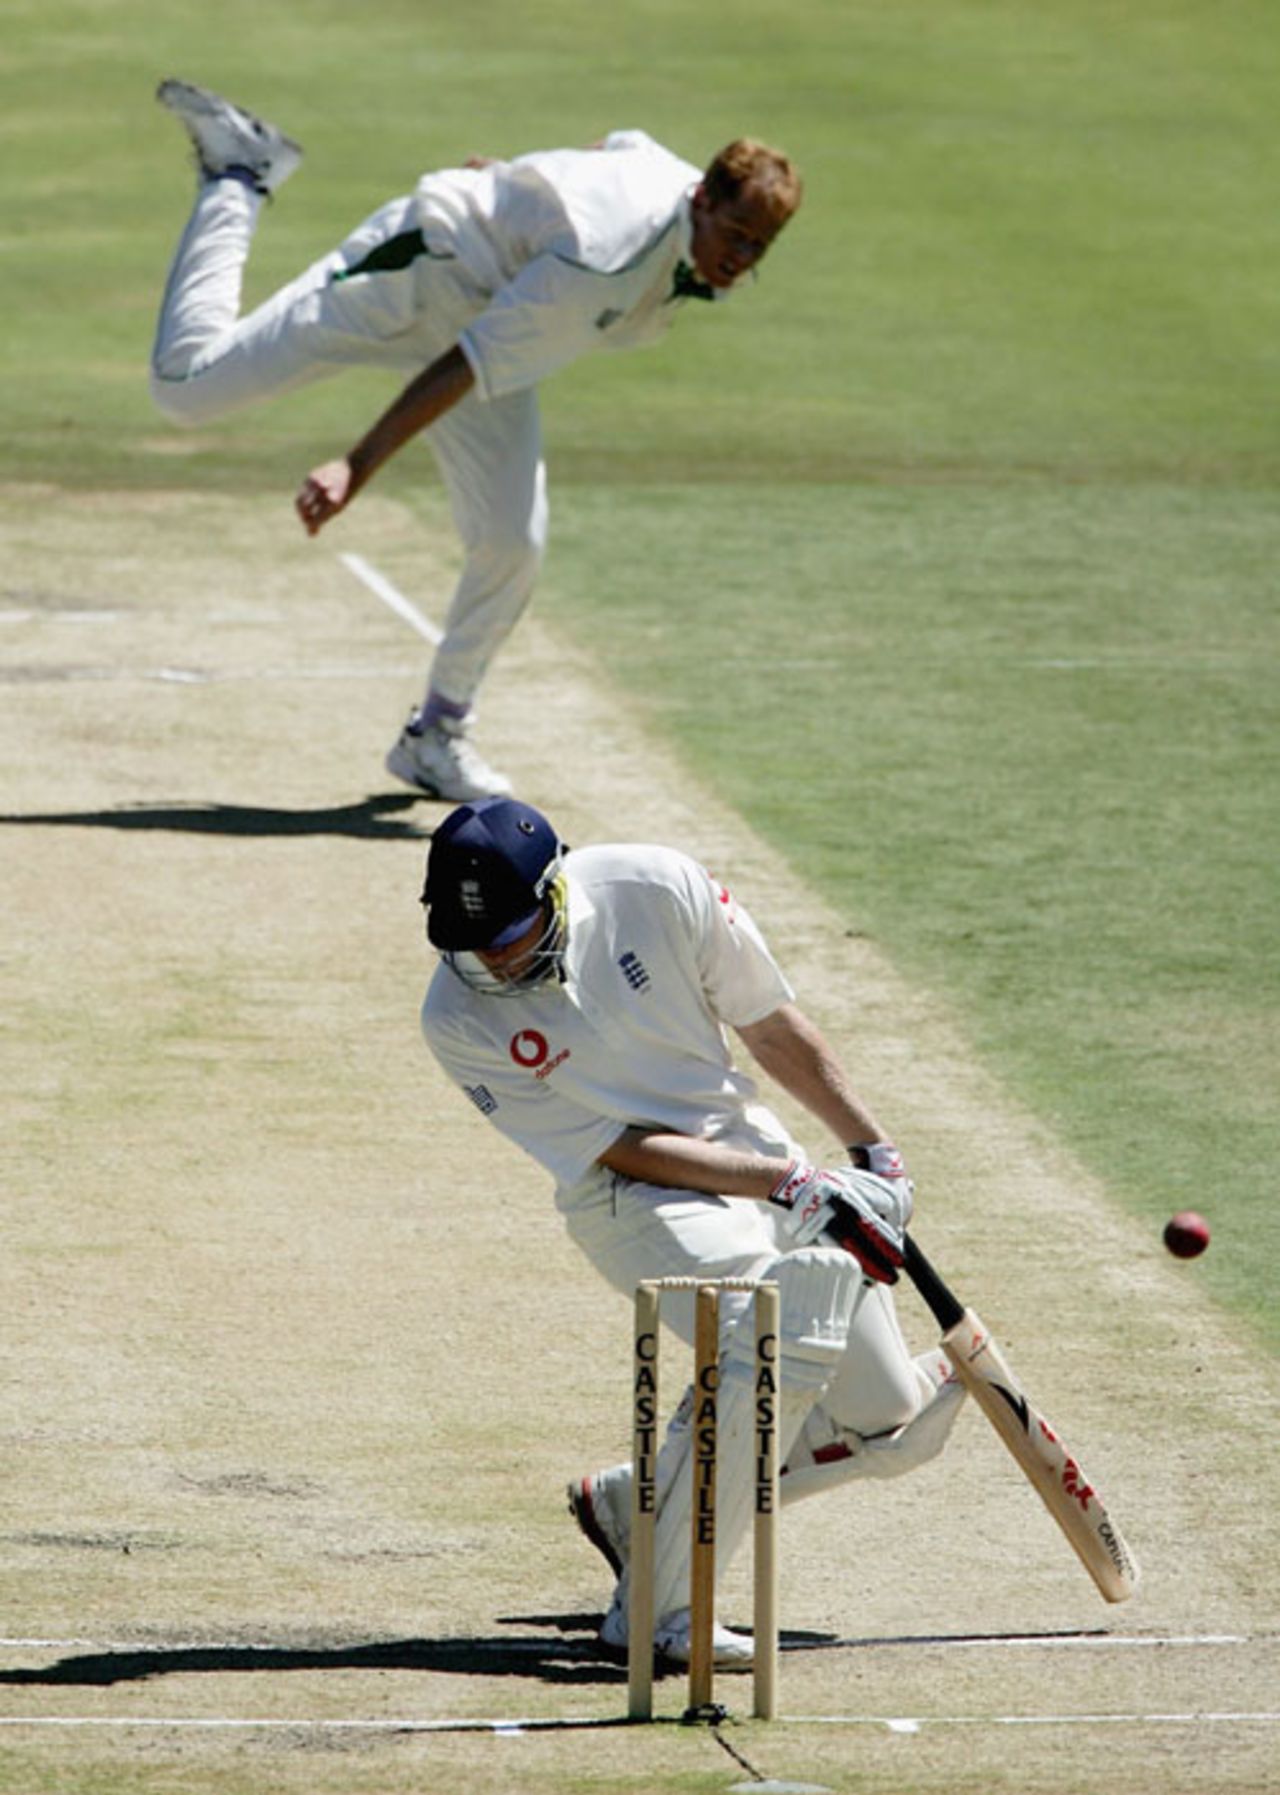 Andrew Flintoff ducks out of the way of a Shaun Pollock bouncer, South Africa v England, 5th Test, Centurion, January 24, 2005